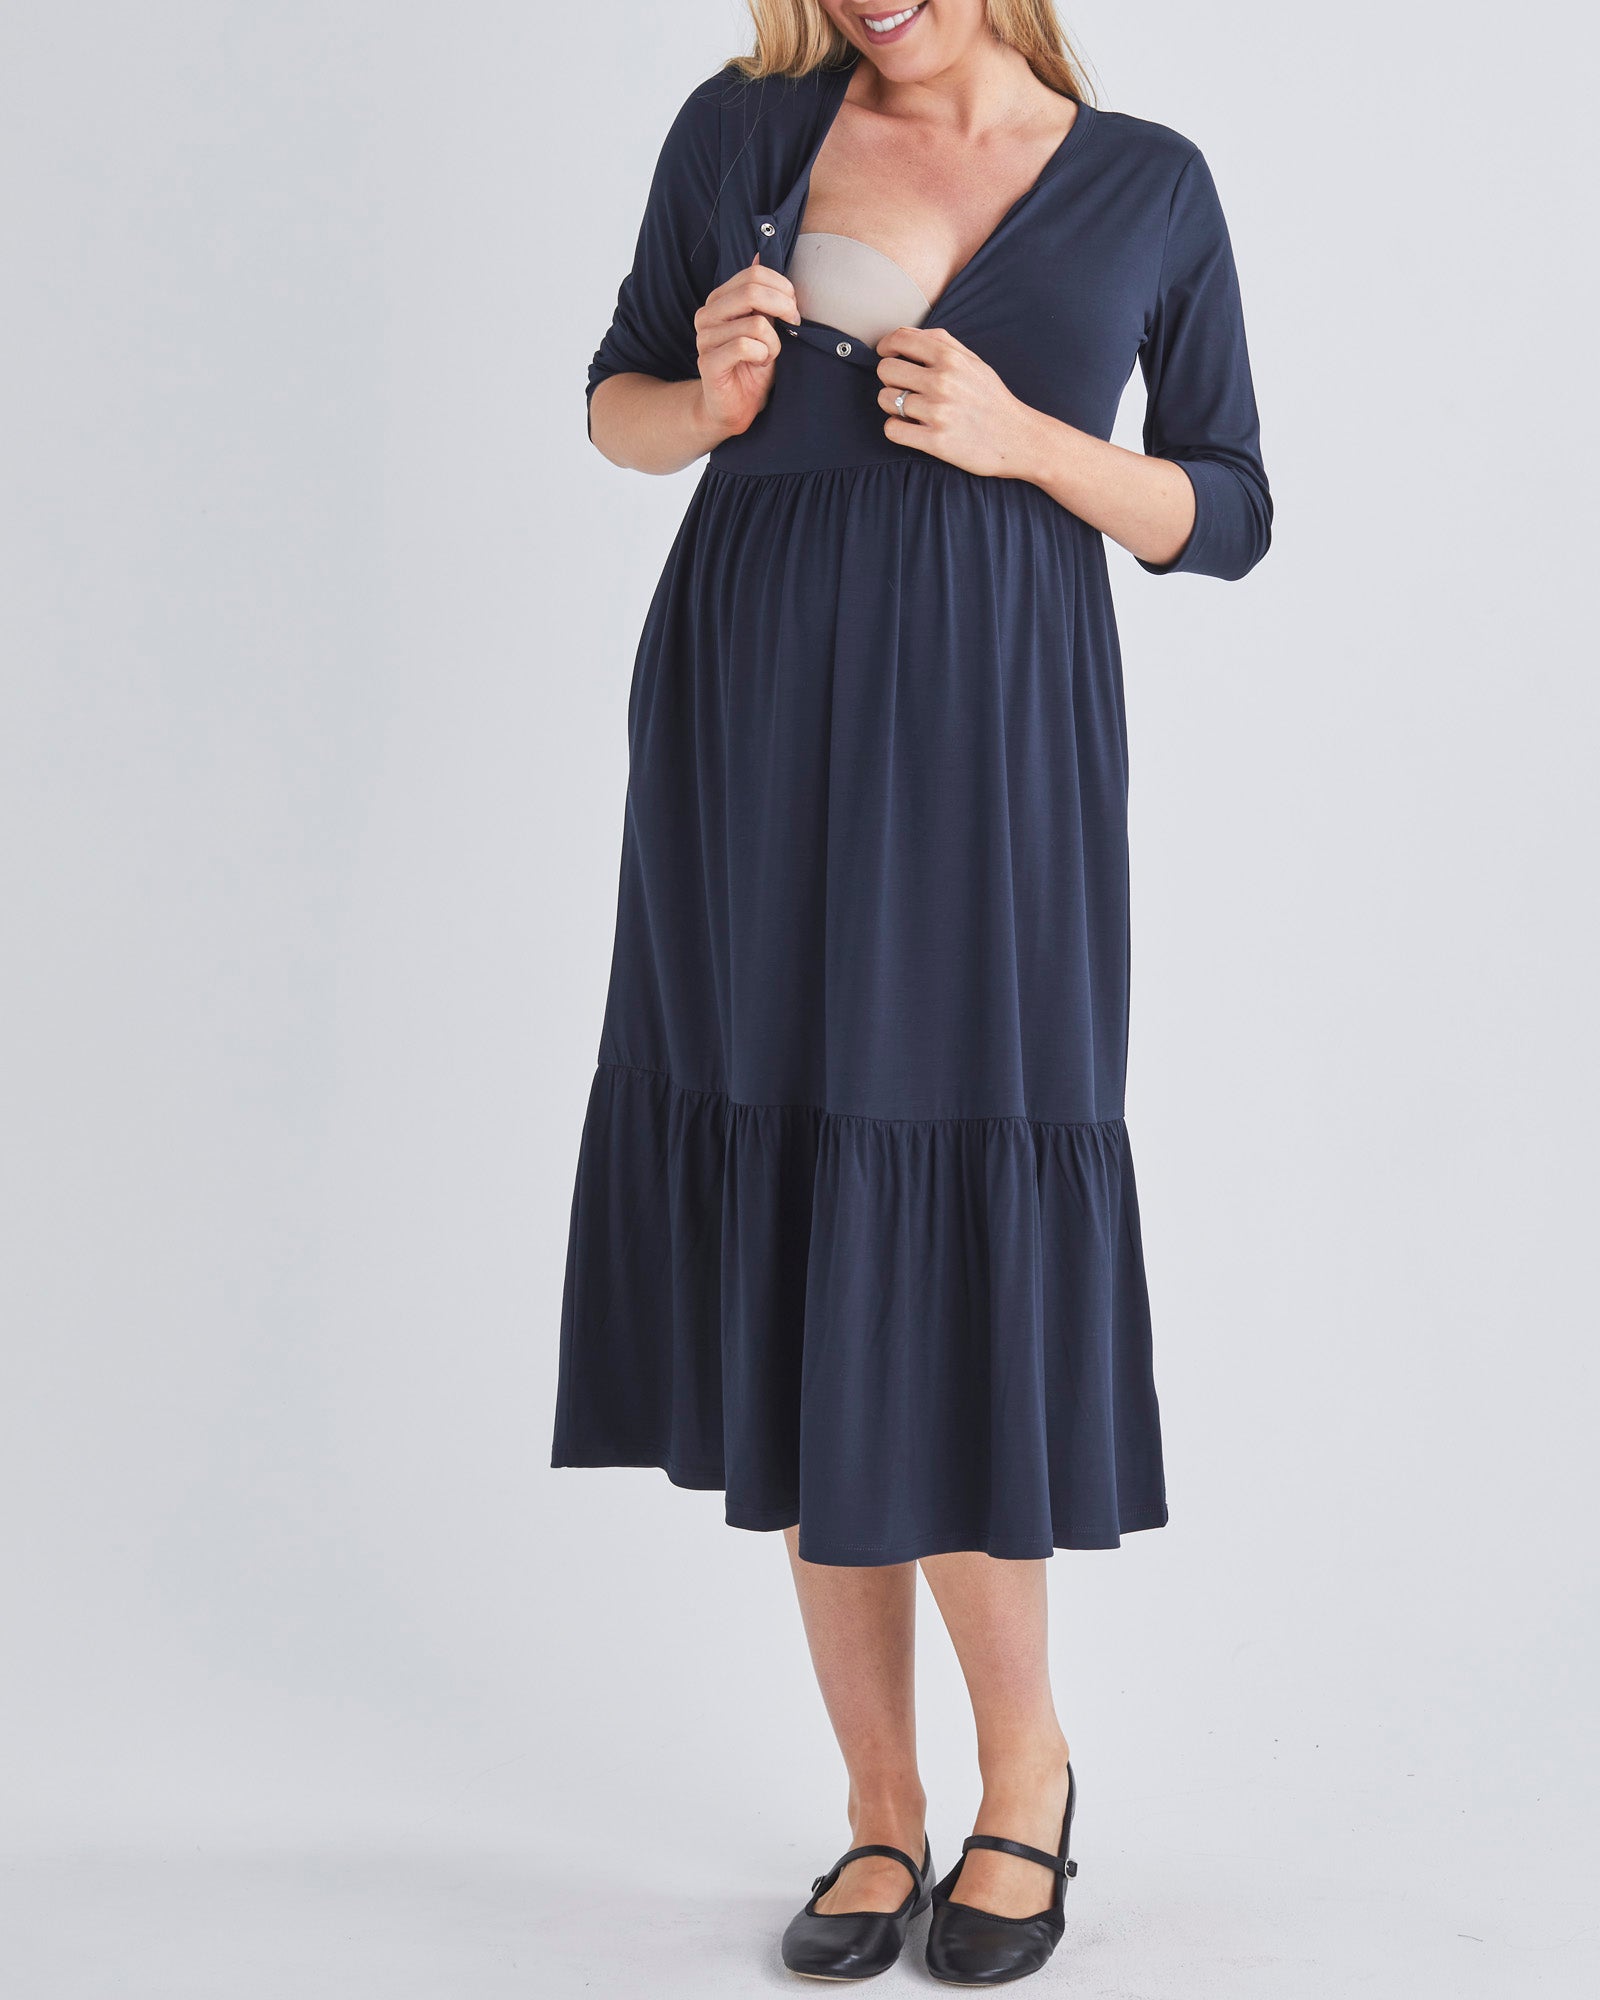 A Woment Wearing Tiered Maternity Midi Dress in Navy from Angel Maternity Australia Showing Easy Breastfeeding Access.